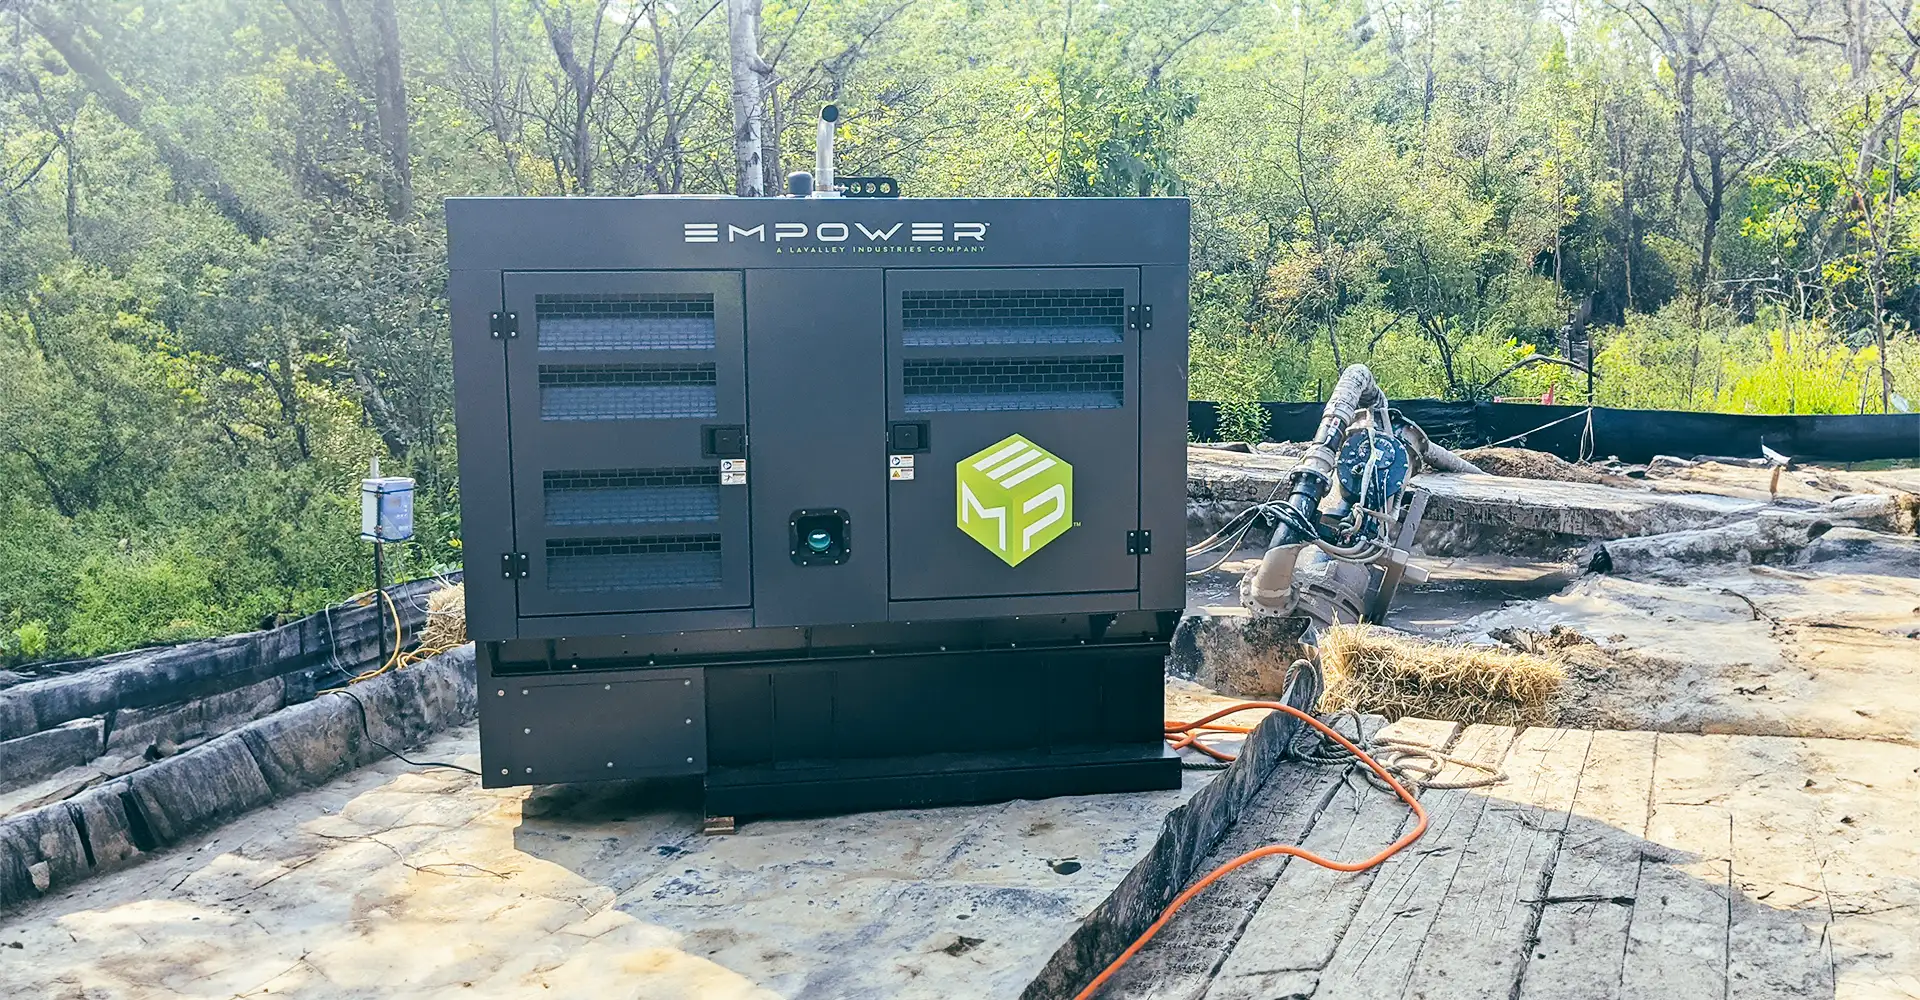 EMPOWER™ and PITPUMP™ efficient generator and powerful mud pump on a HDD job site. This duo is perfect for efficient power solutions on remote infrastructure construction projects.